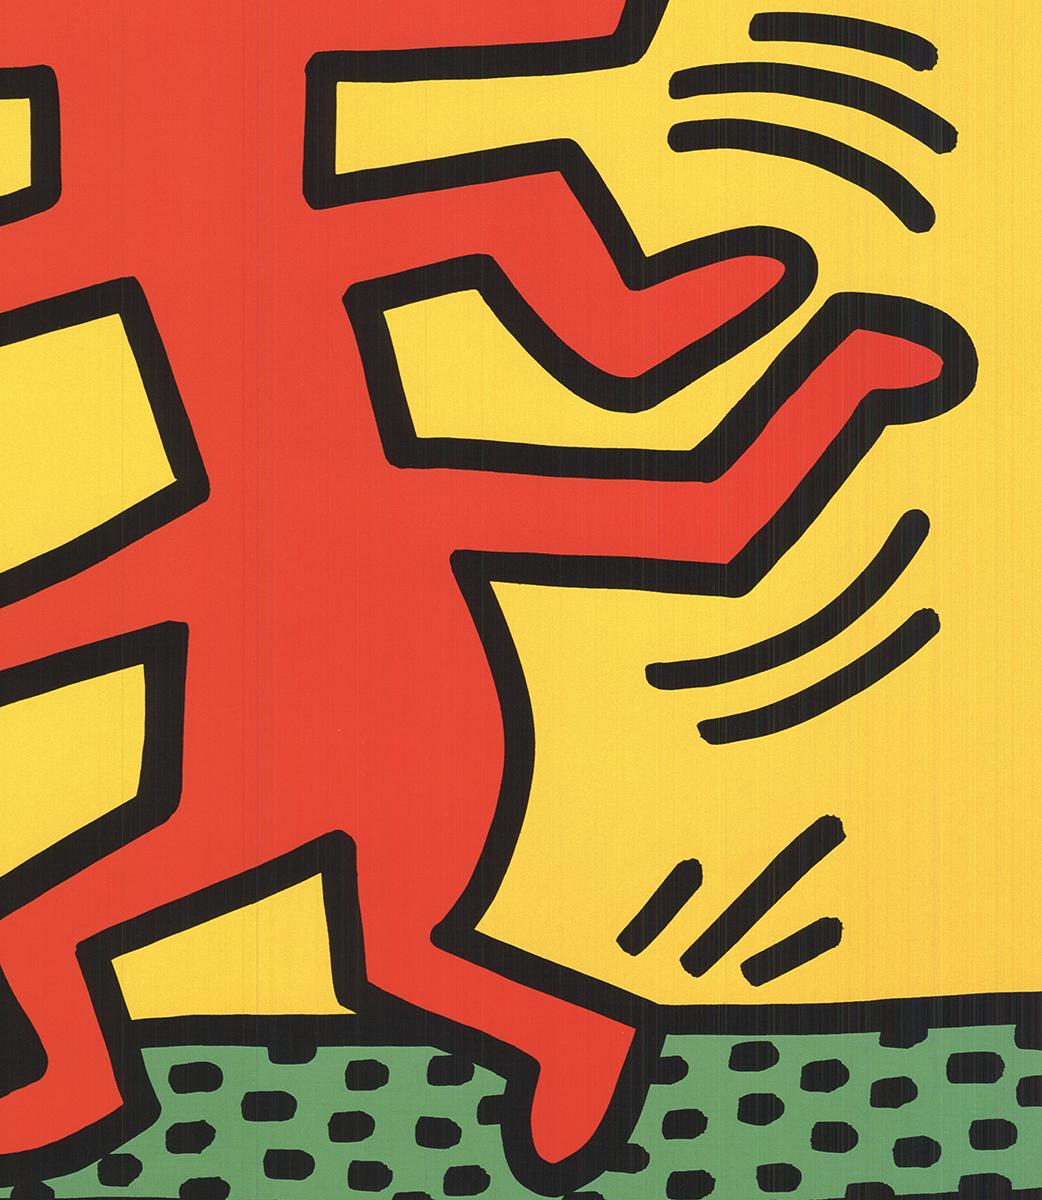 Keith Haring 'Untitled (From the Growing Series), 1988' 2008- Lithographie offset en vente 3